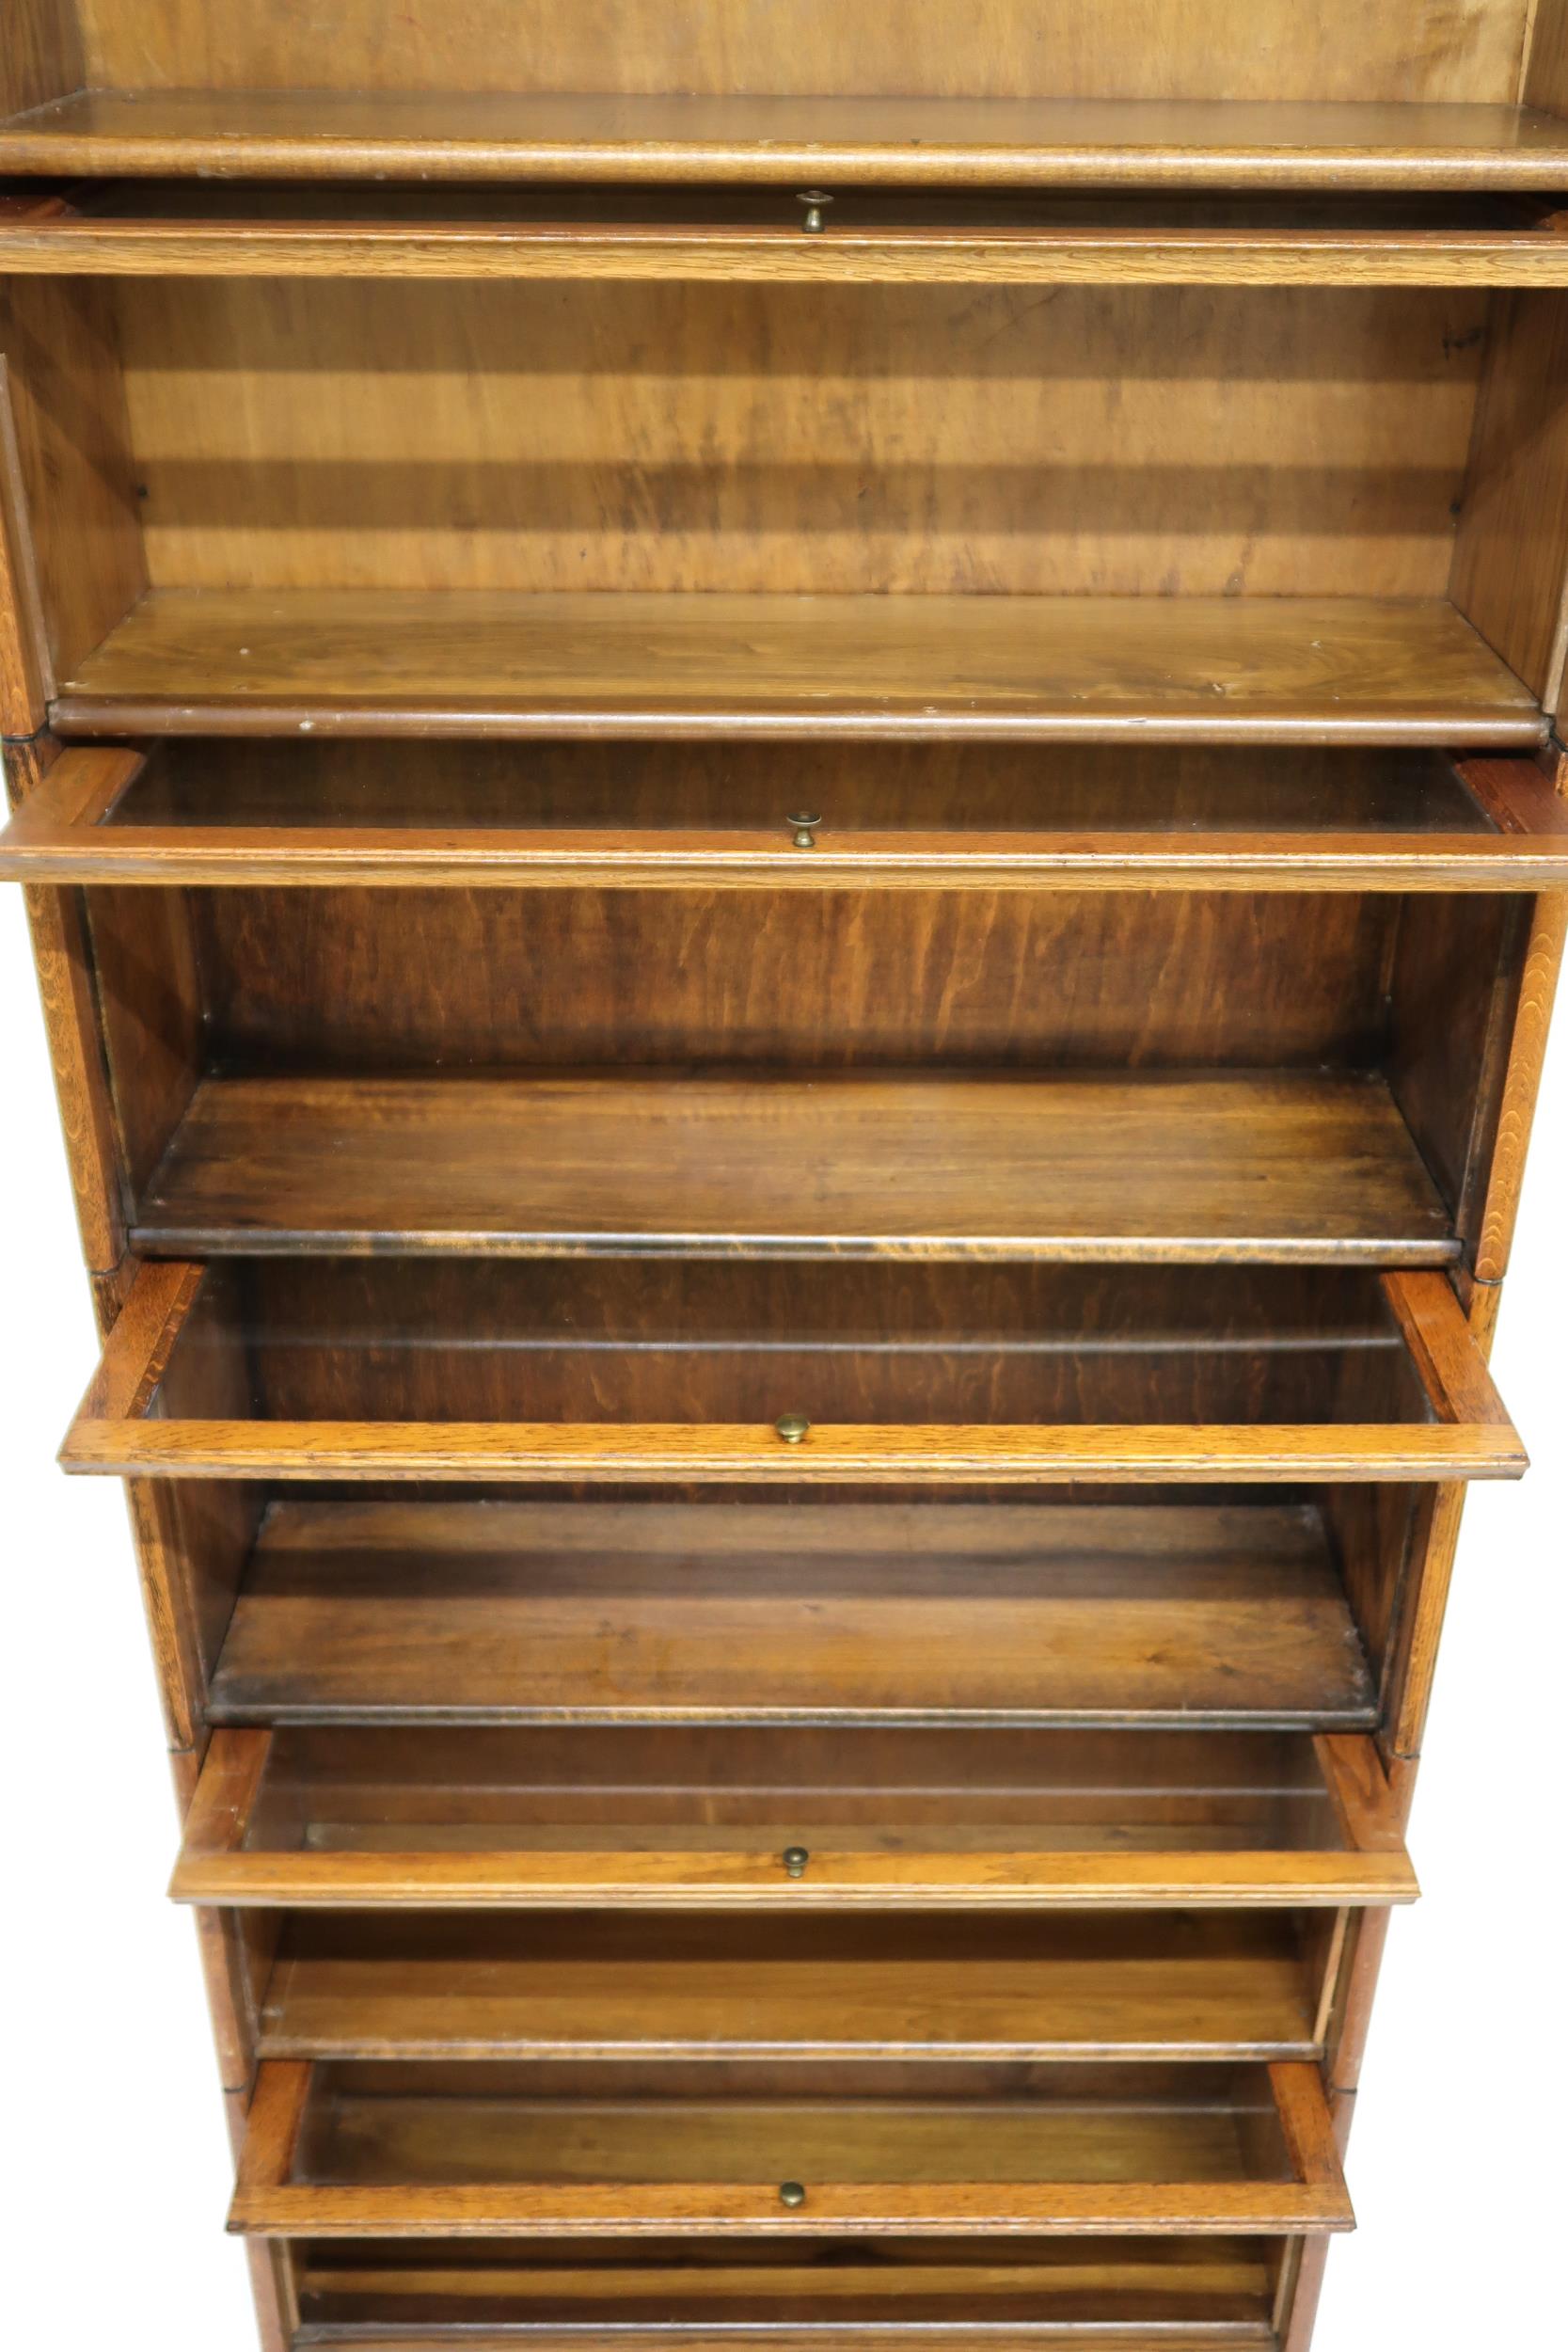 AN EARLY 20TH CENTURY OAK GLOBE-WERNICKE STYLE SIX TIER SECTIONAL BOOKCASE with six glazed doored - Image 8 of 13